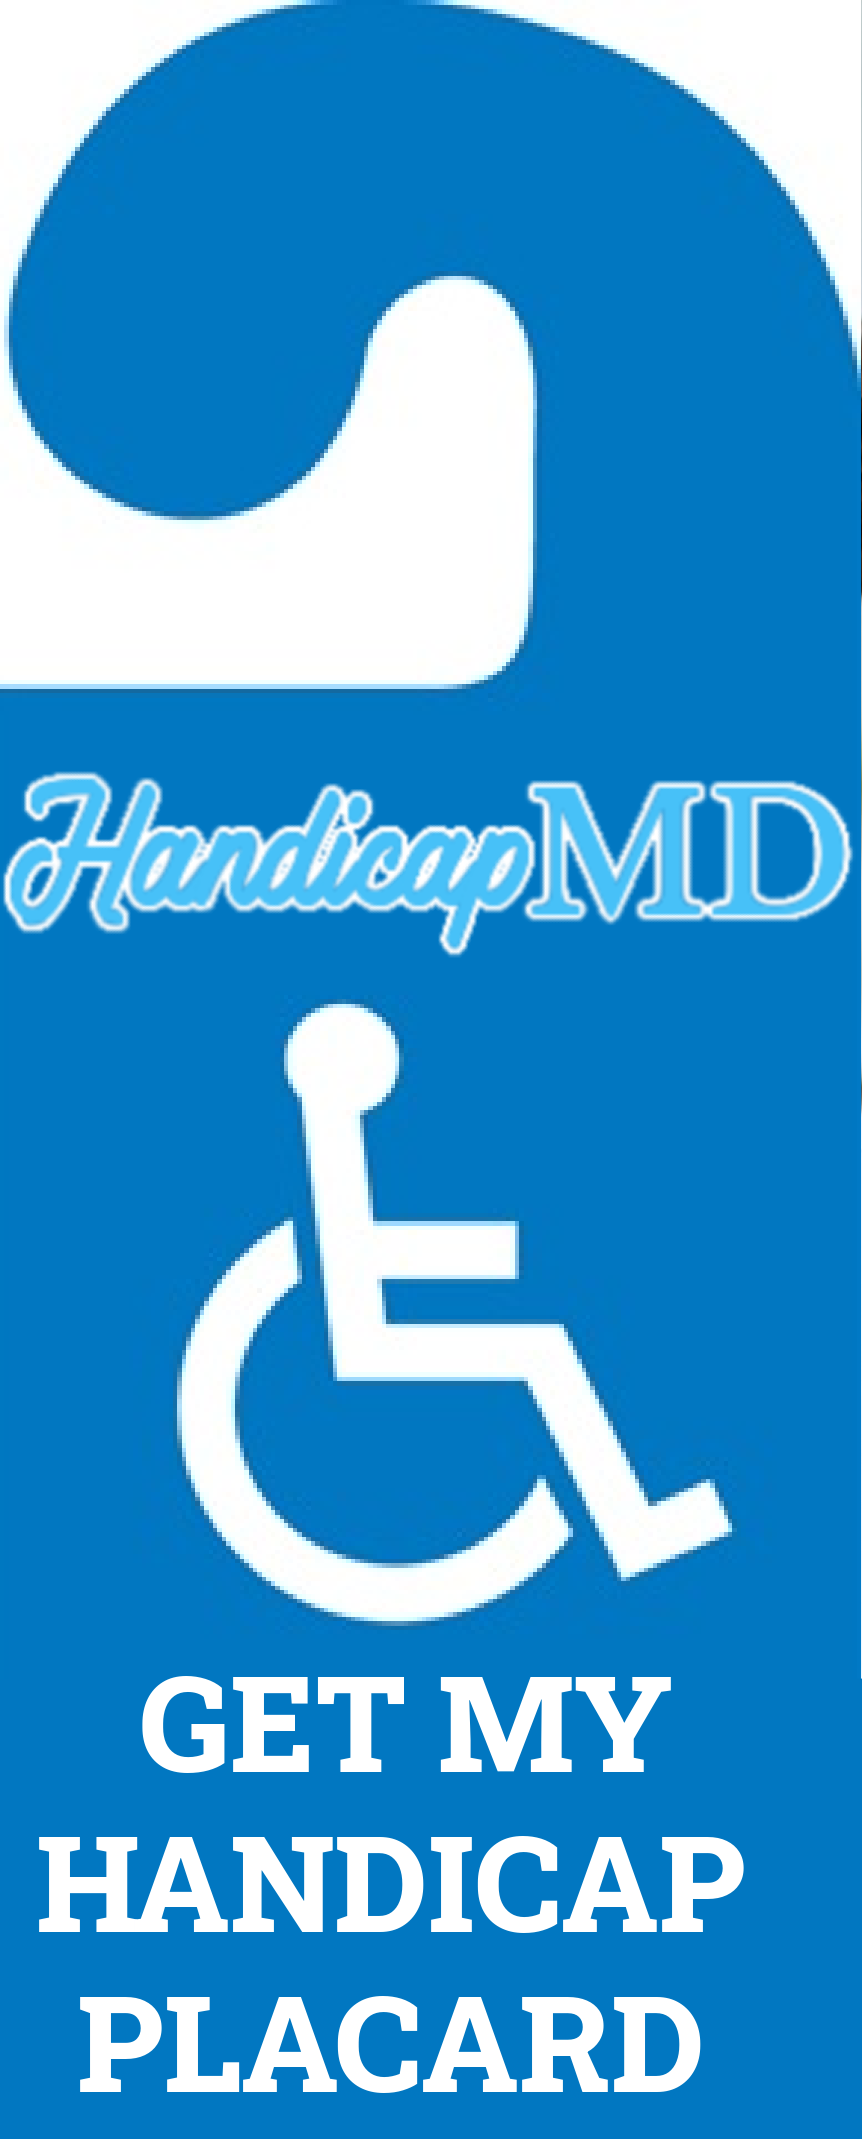 Handicap Placard Violations and Penalties in Vermont: What You Need to Know